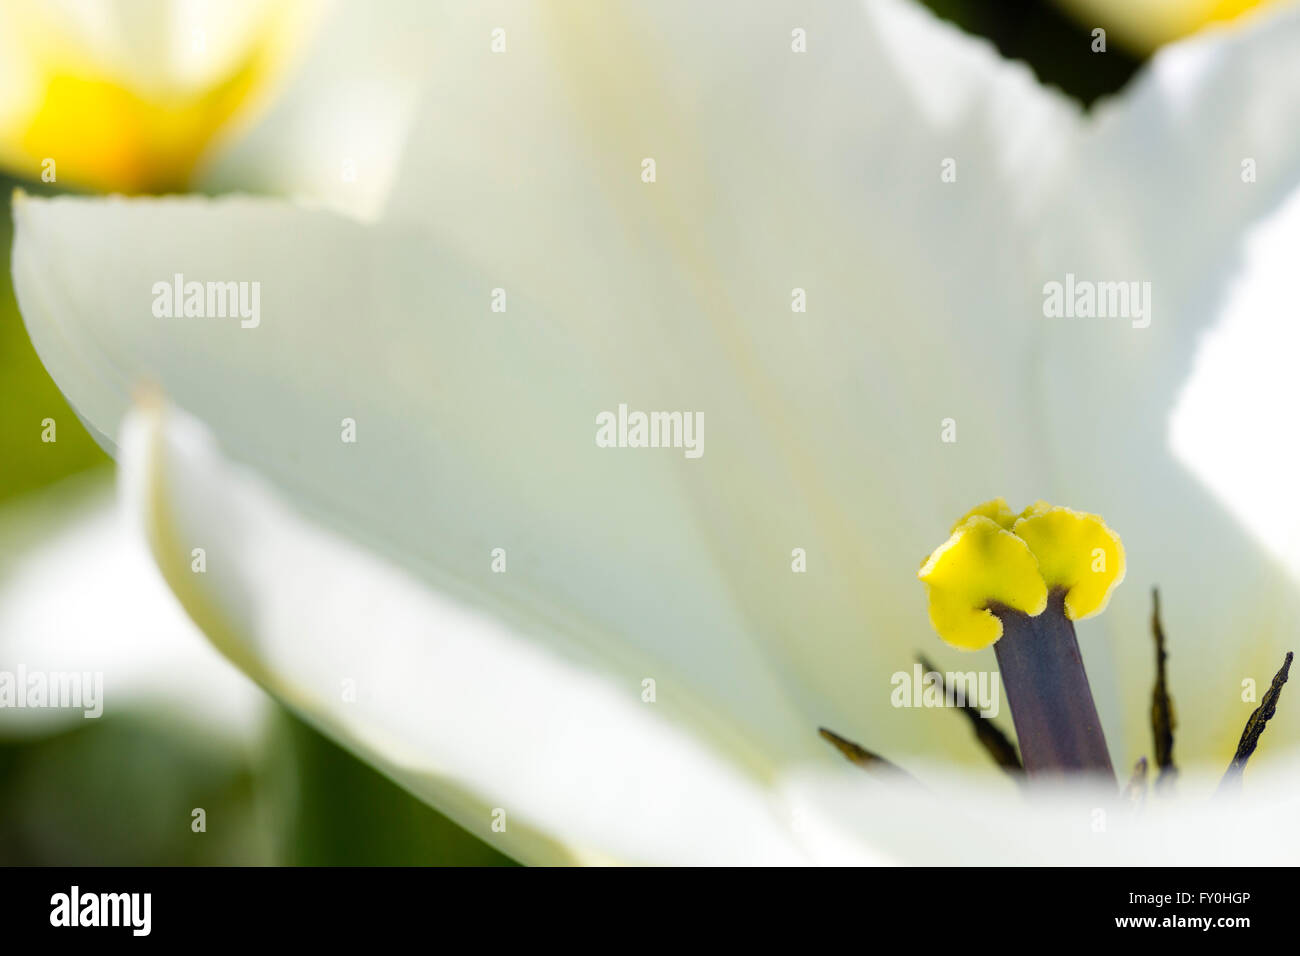 White tulips in the spring sunshine. Stock Photo